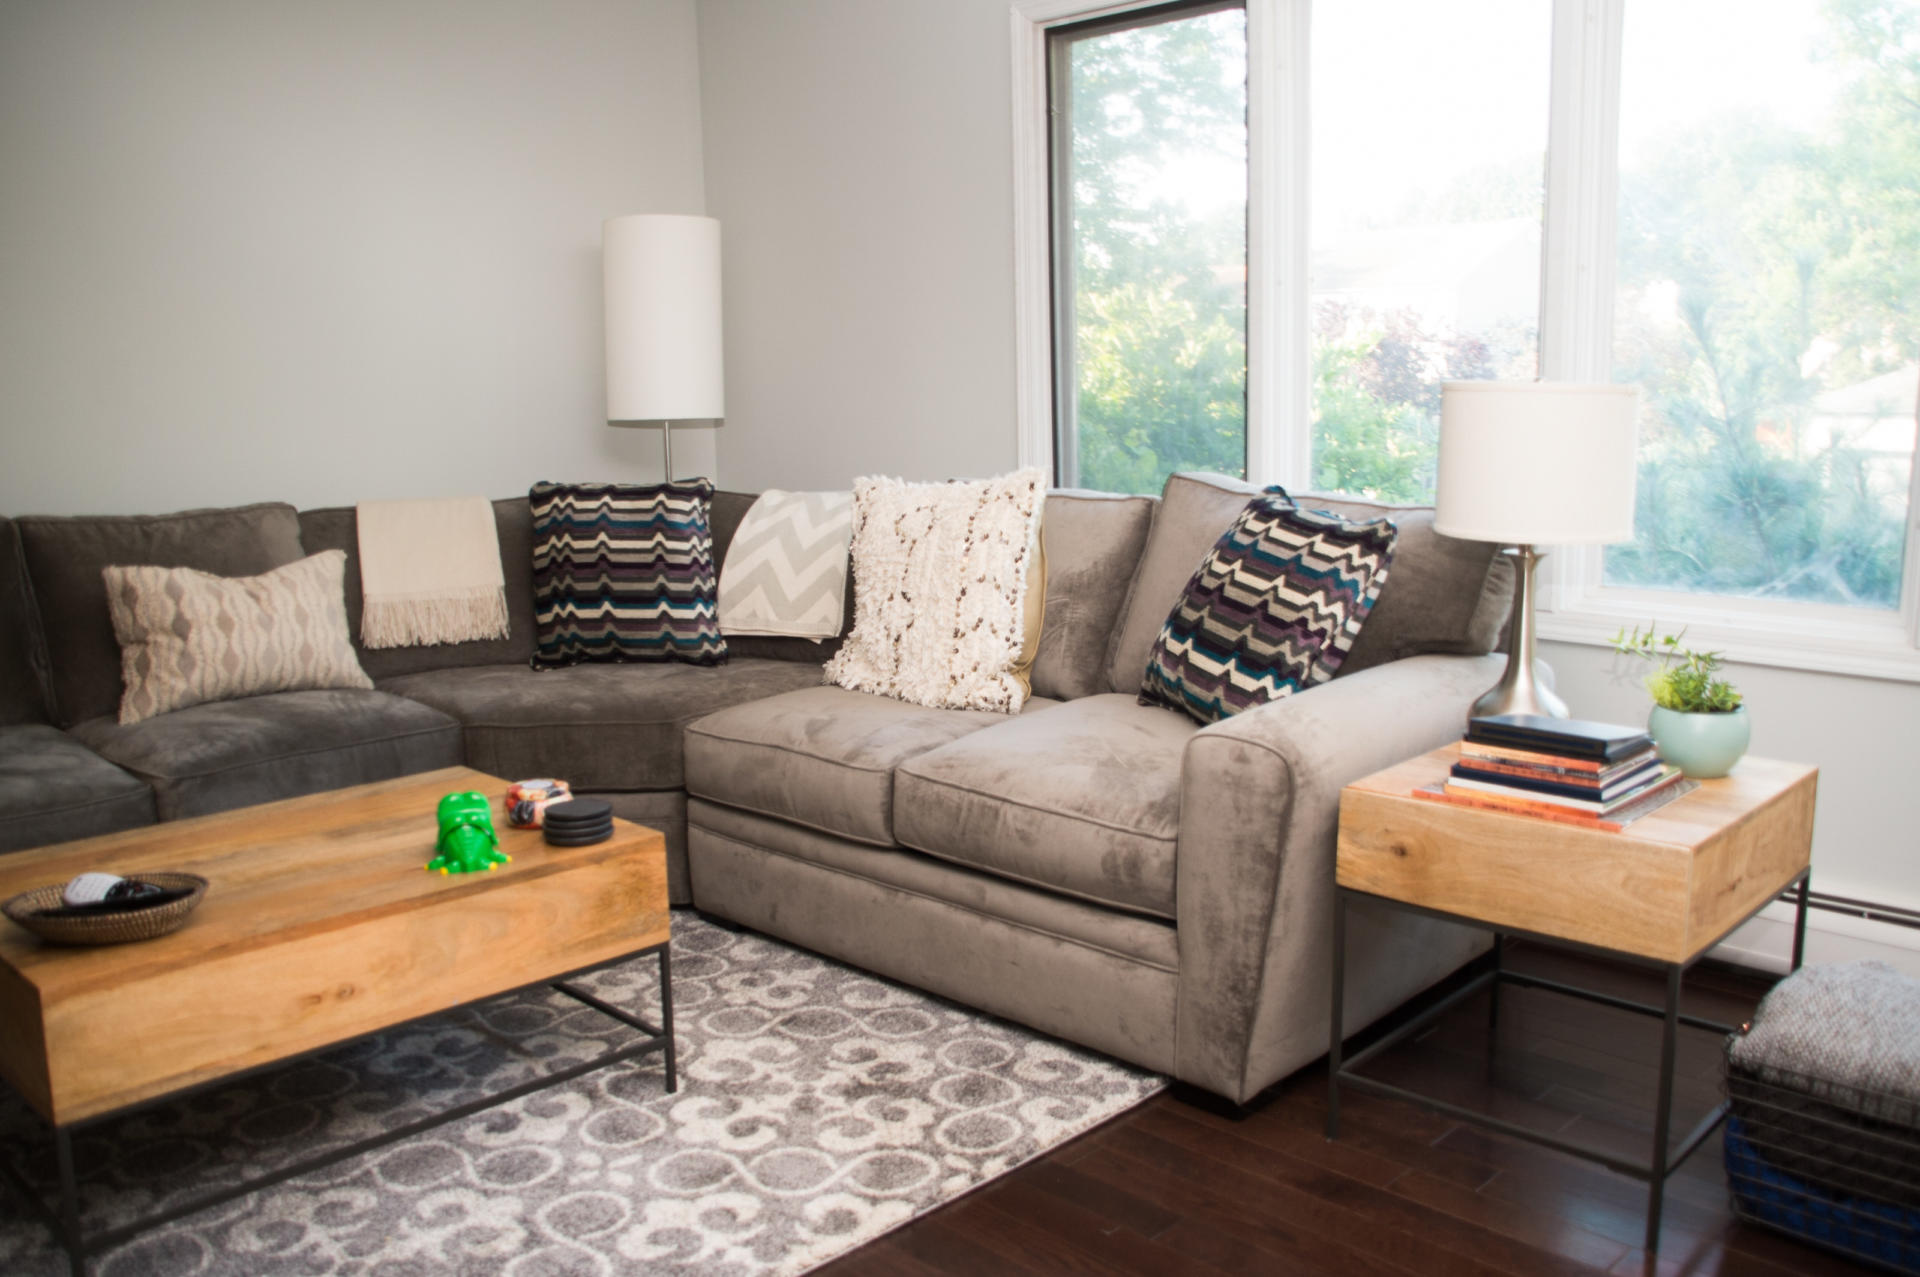 HOME: Our New Living Room with Raymour and Flanigan Sofa by New Jersey lifestyle blogger What's For Dinner Esq.